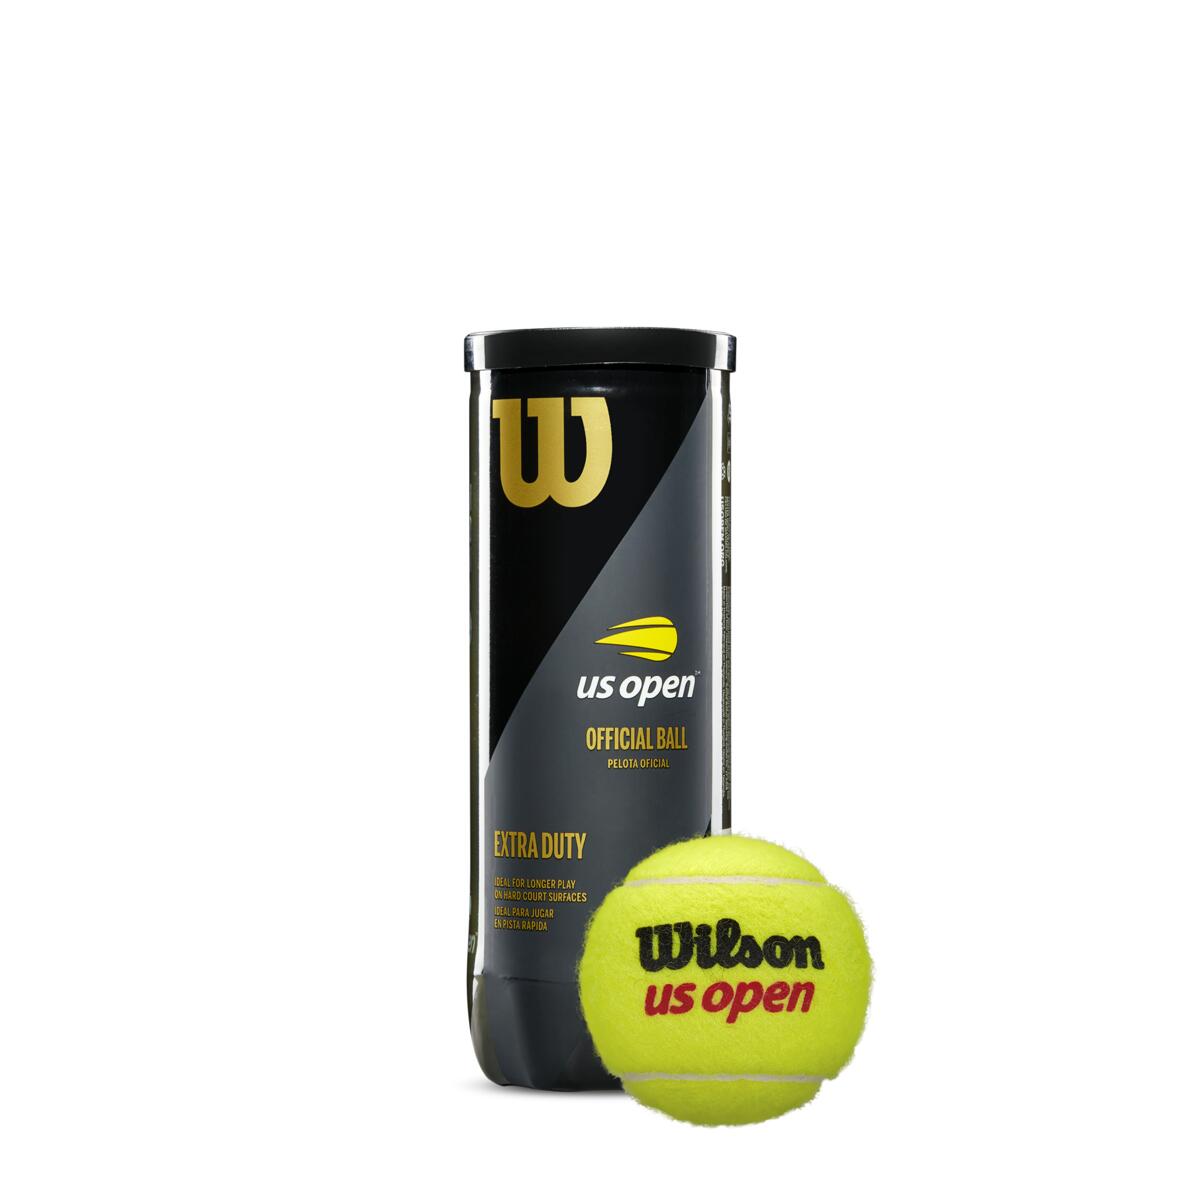 Wilson Us Open Extra Duty - Canette Individuel (3 Balles)